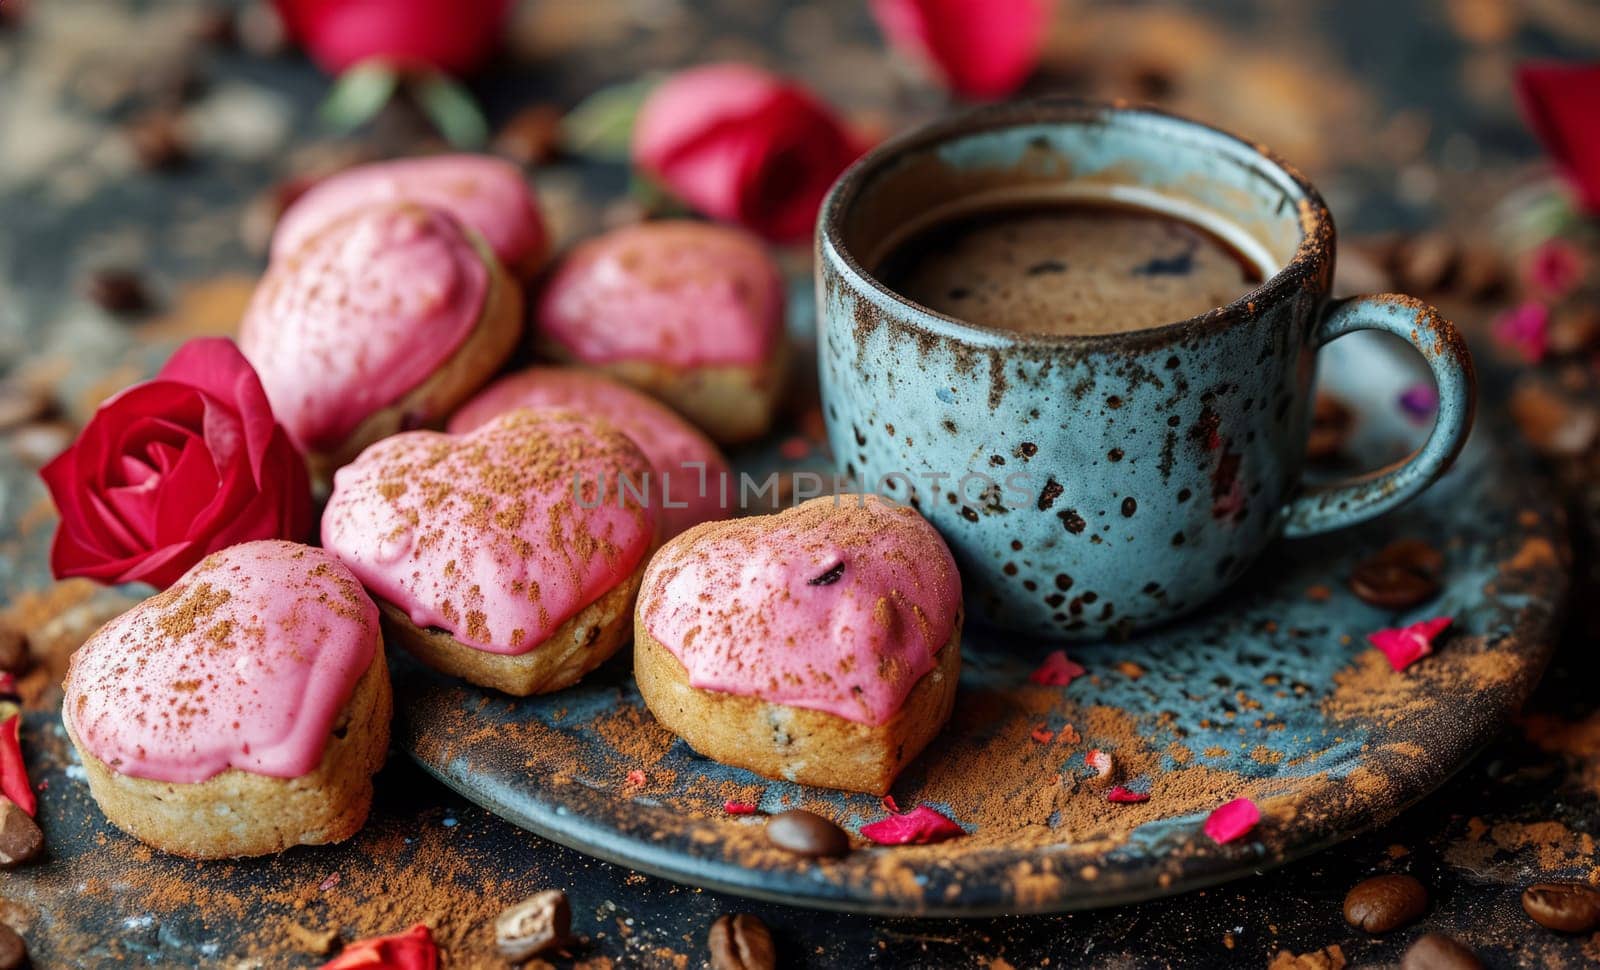 Homemade heart shaped cookies and a cup of tea or coffee on the table.